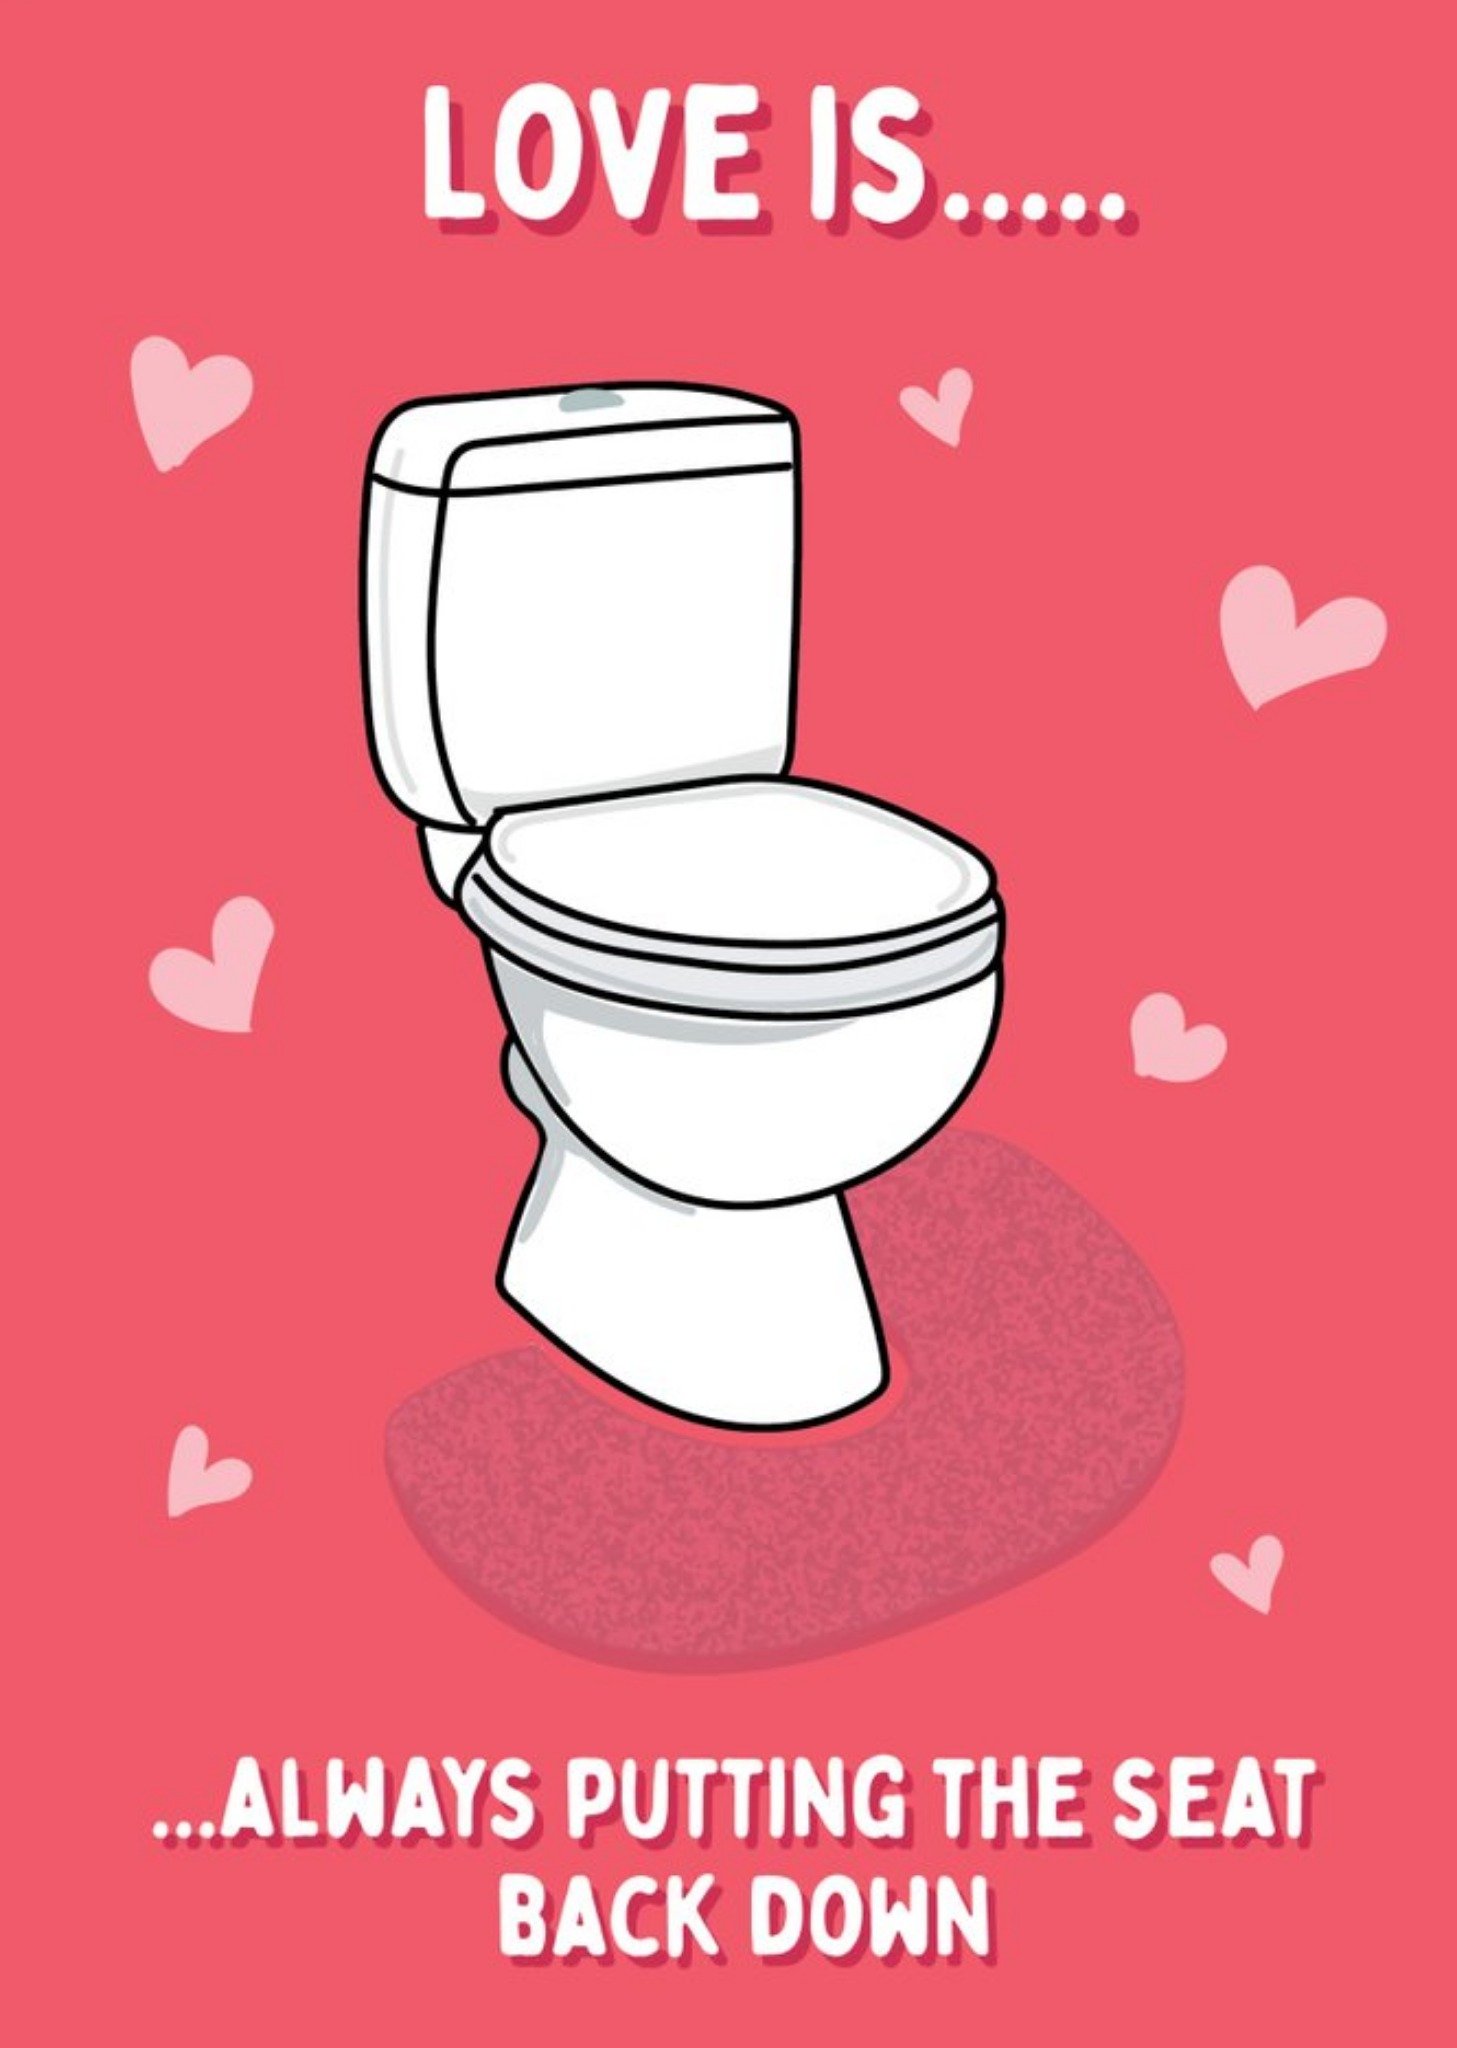 Moonpig Illustration Of A Toilet Love Is Always Putting The Seat Back Down Valentines Day Card, Larg